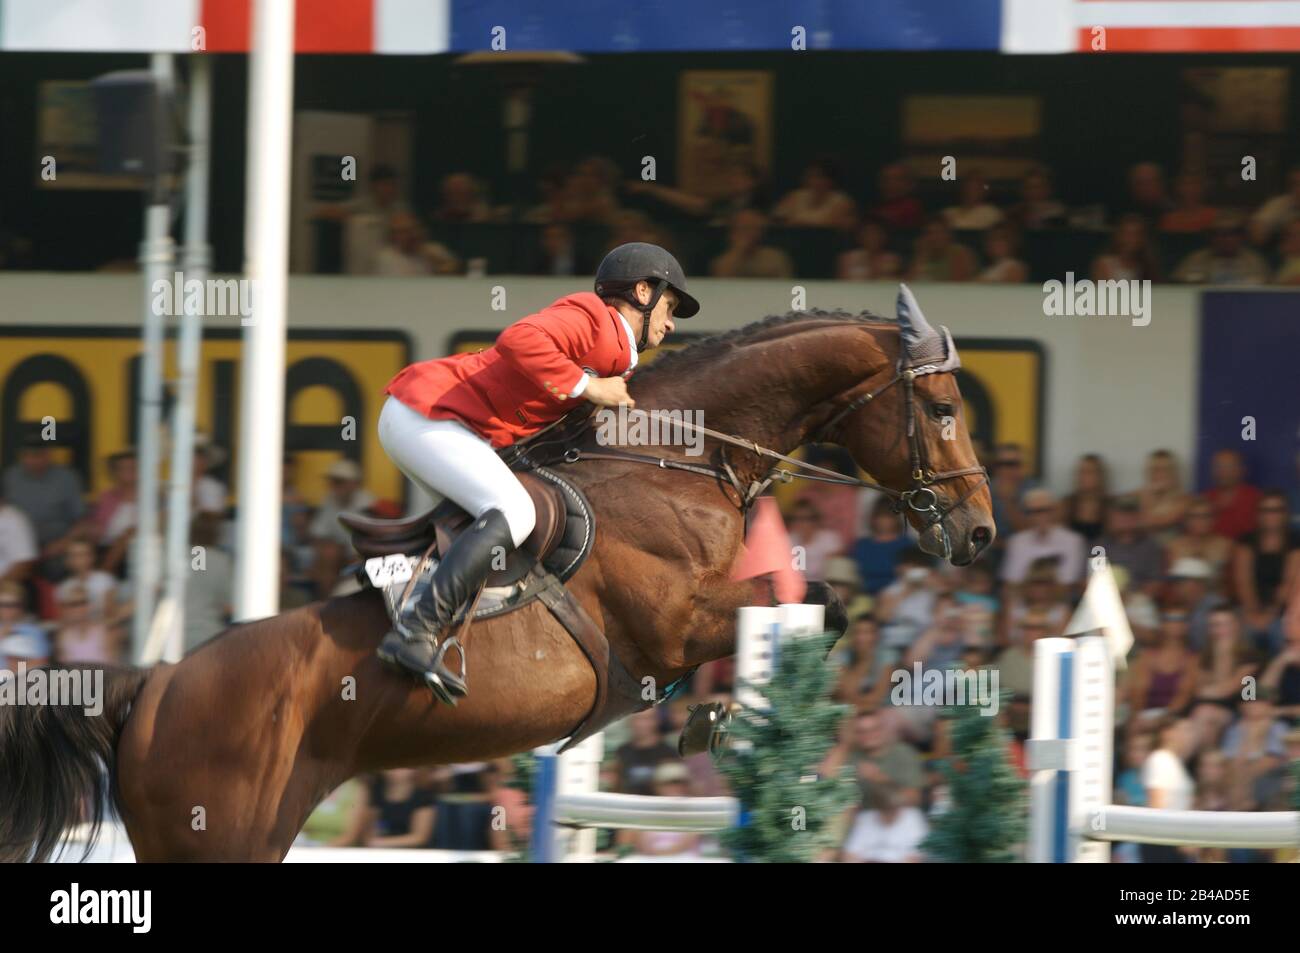 Yves Simon (BEL)  riding Mazarin des Perees, CSIO Masters, Spruce Meadows, 8 September 2006, BMO Nations Cup Stock Photo